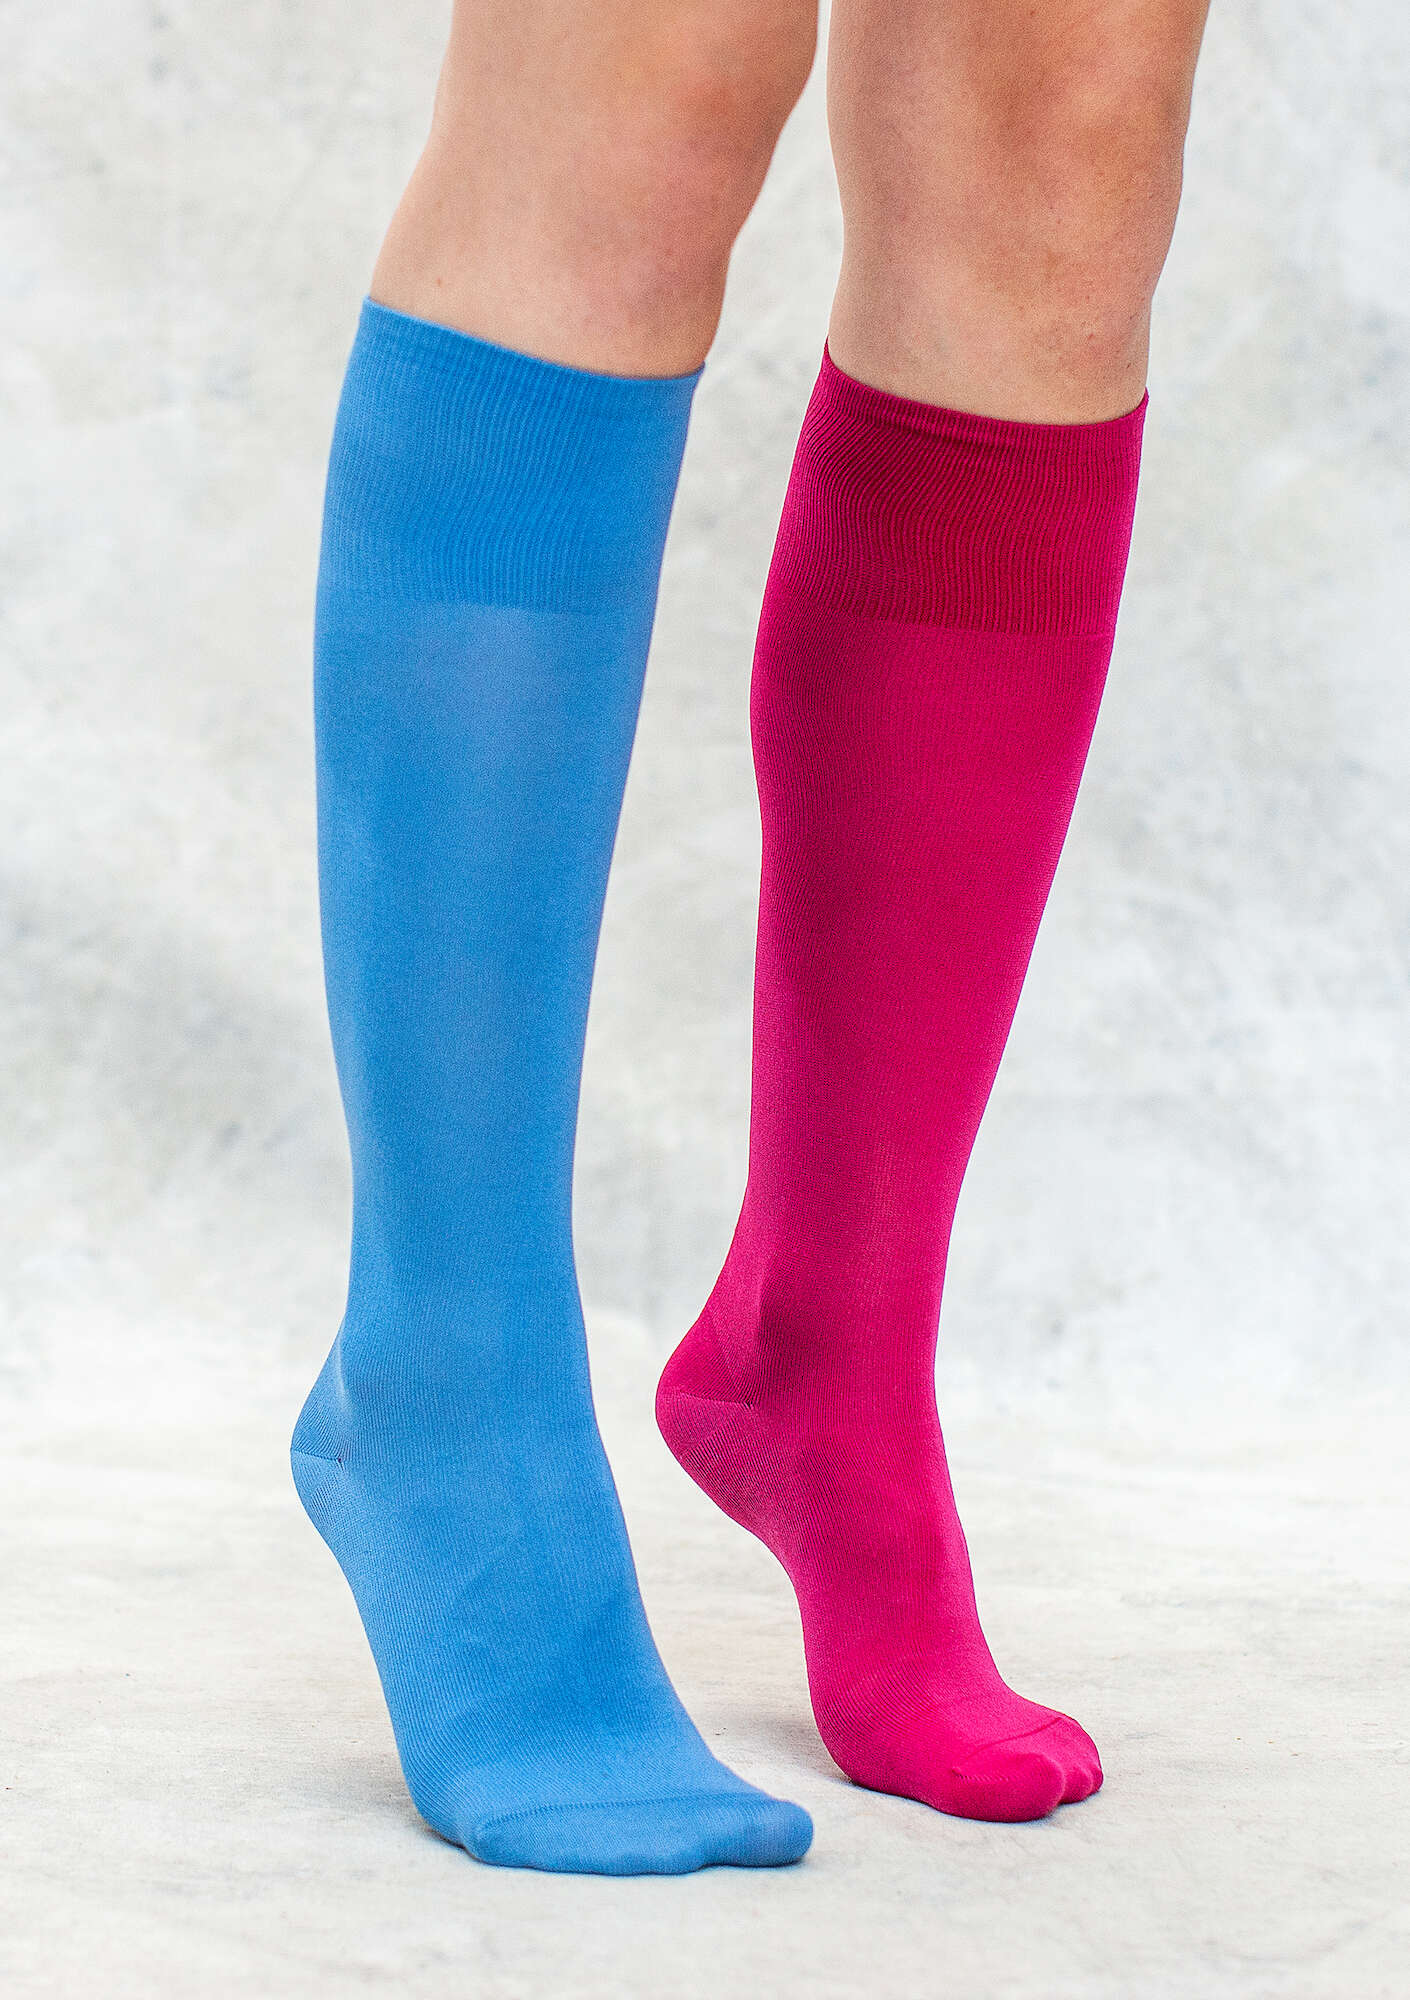 Solid-color knee-highs in recycled nylon cyclamen